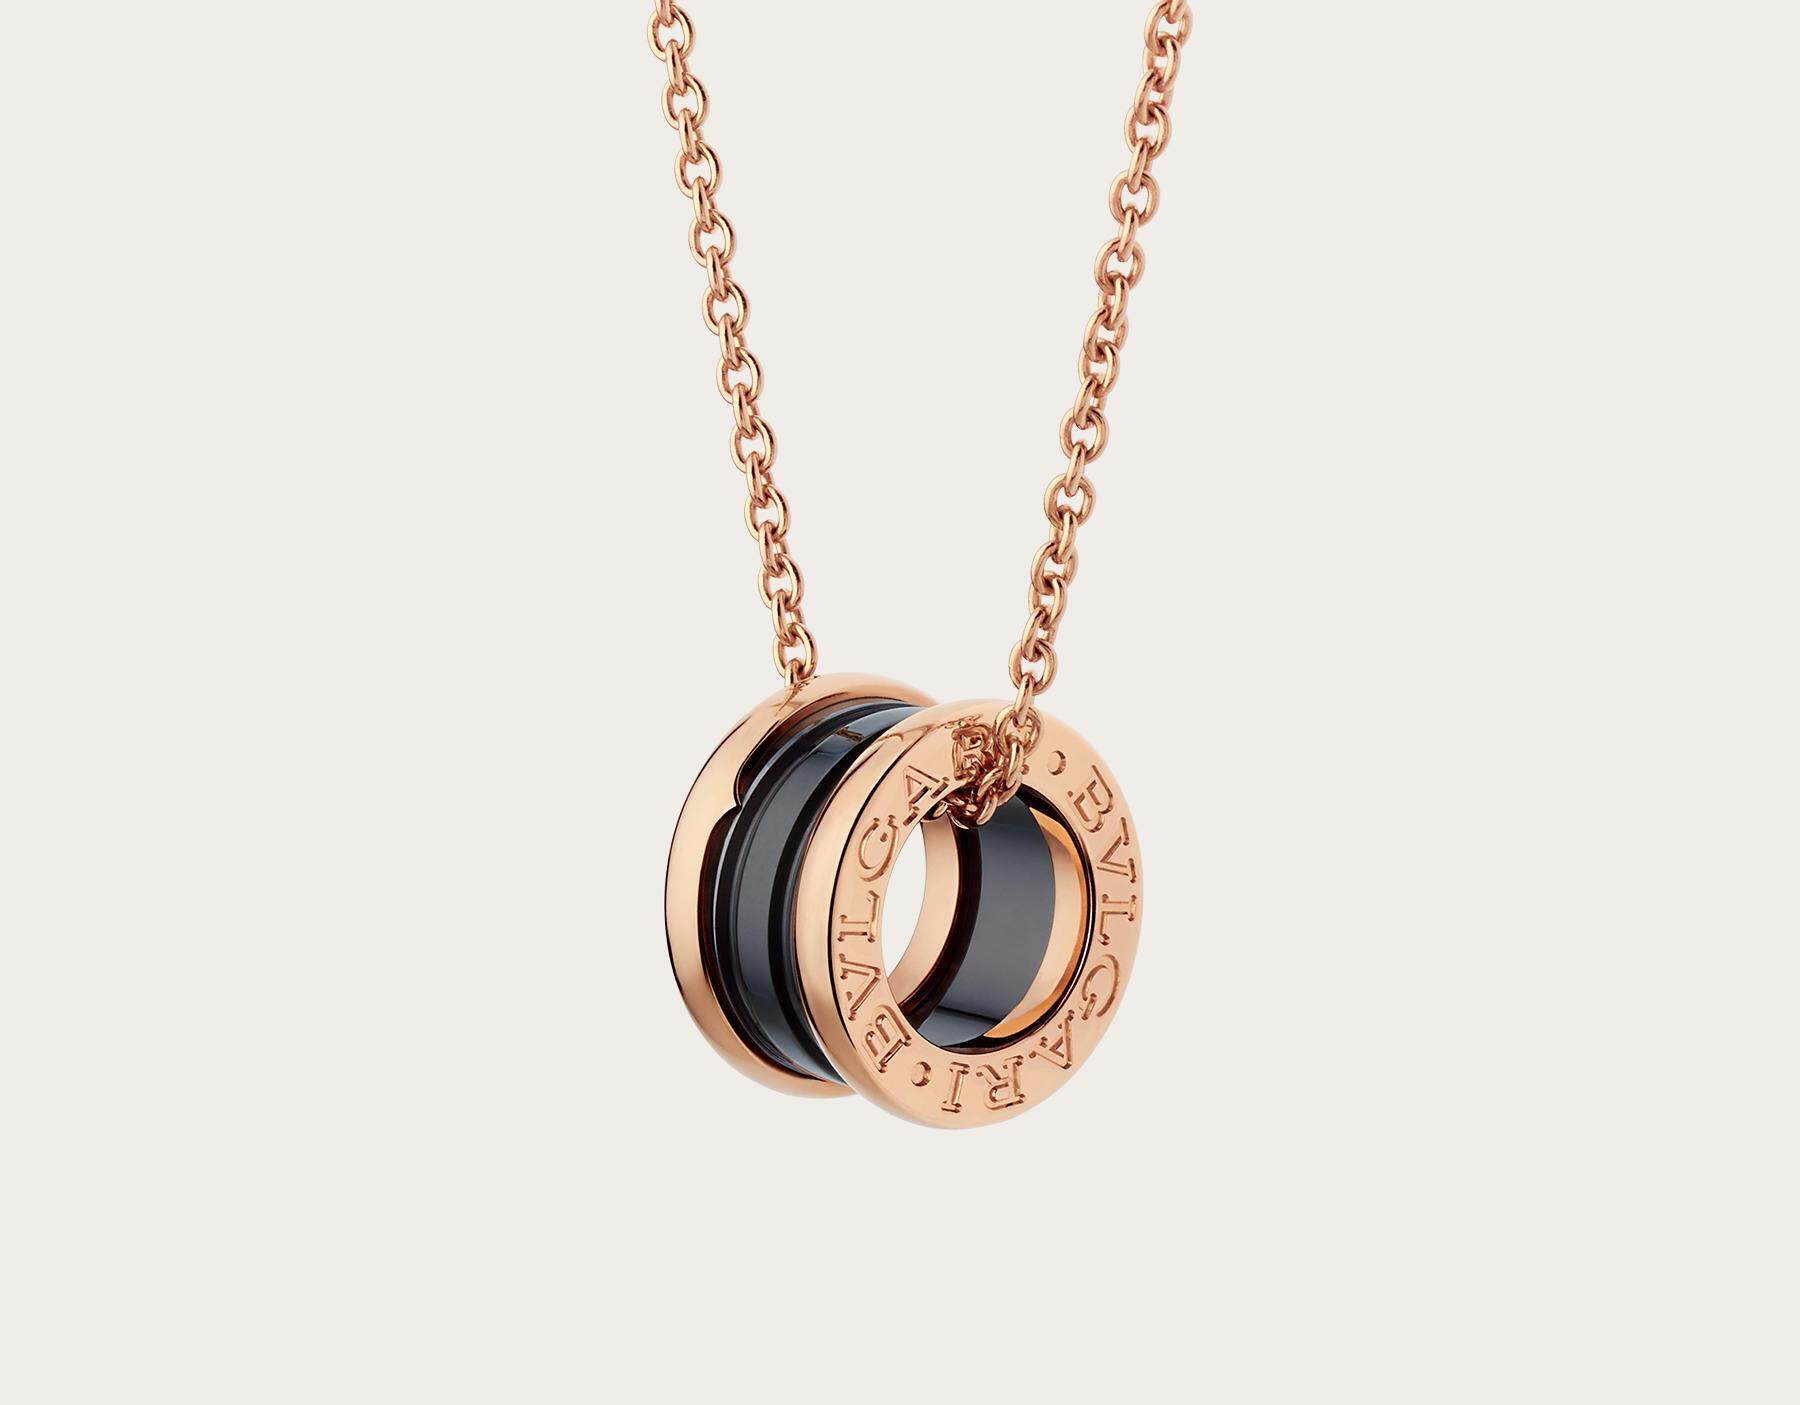 how much does a bvlgari necklace cost